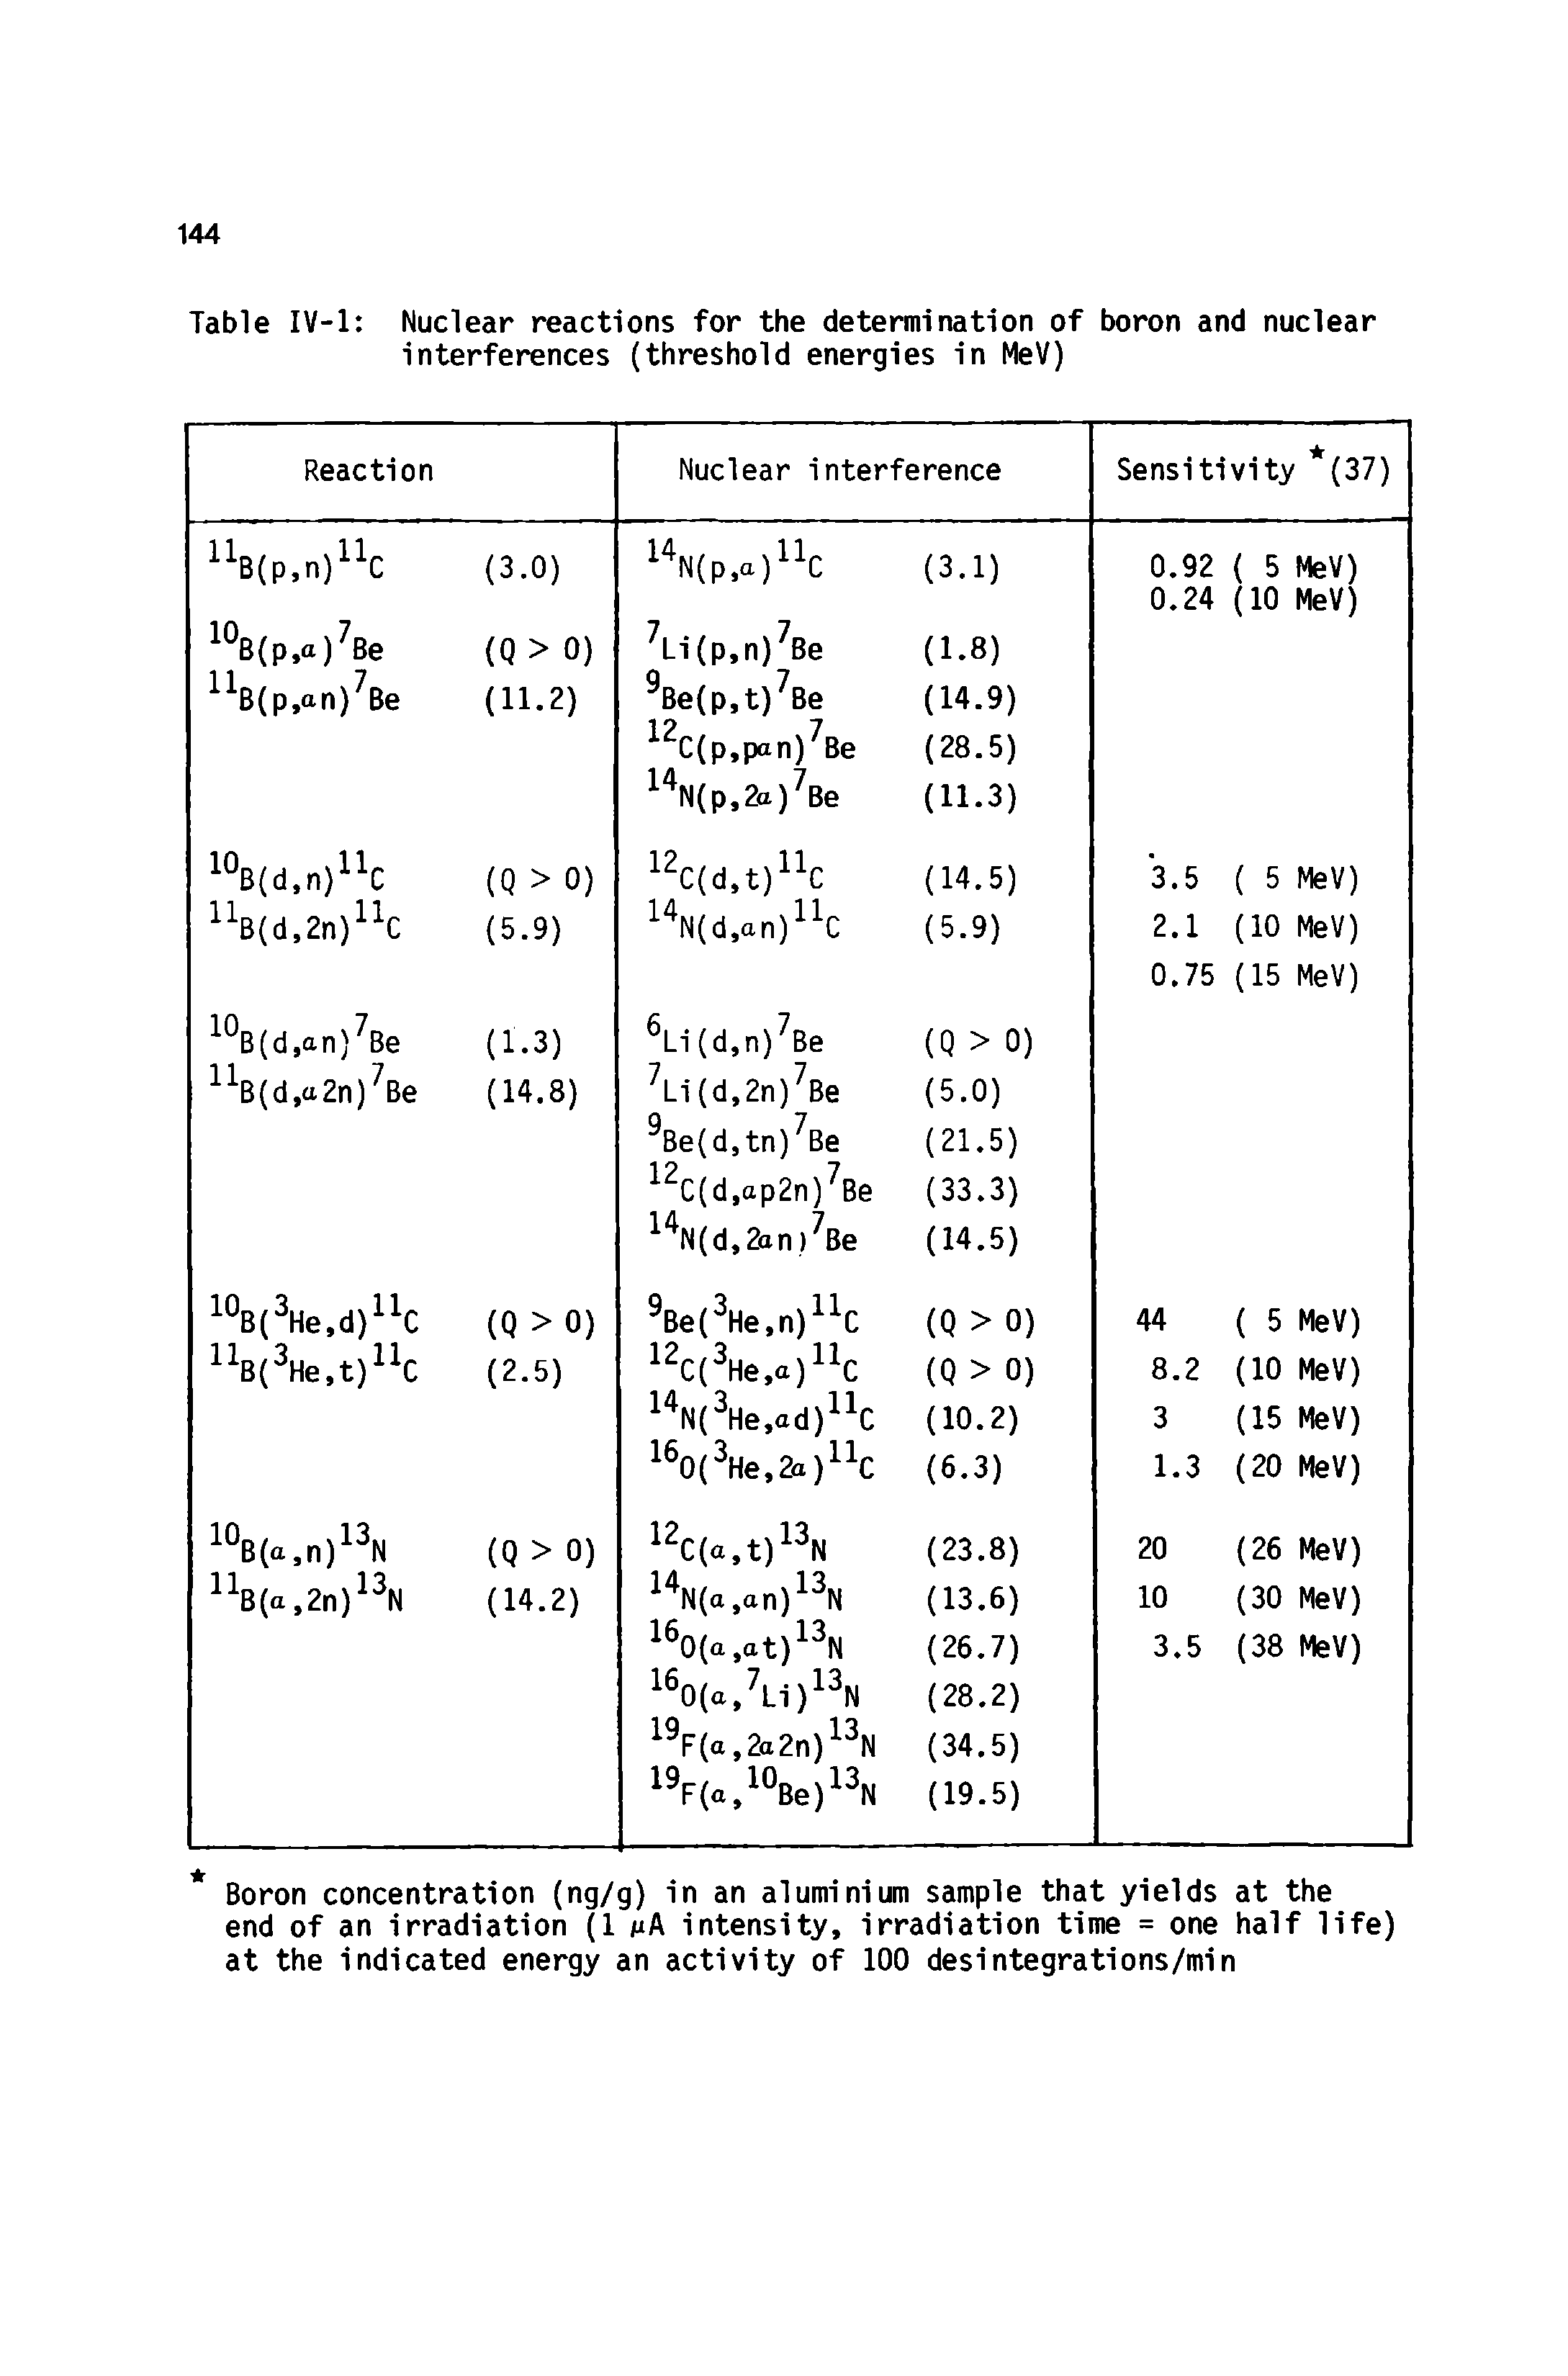 Table IV-1 Nuclear reactions for the determination of boron and nuclear interferences (threshold energies in MeV)...